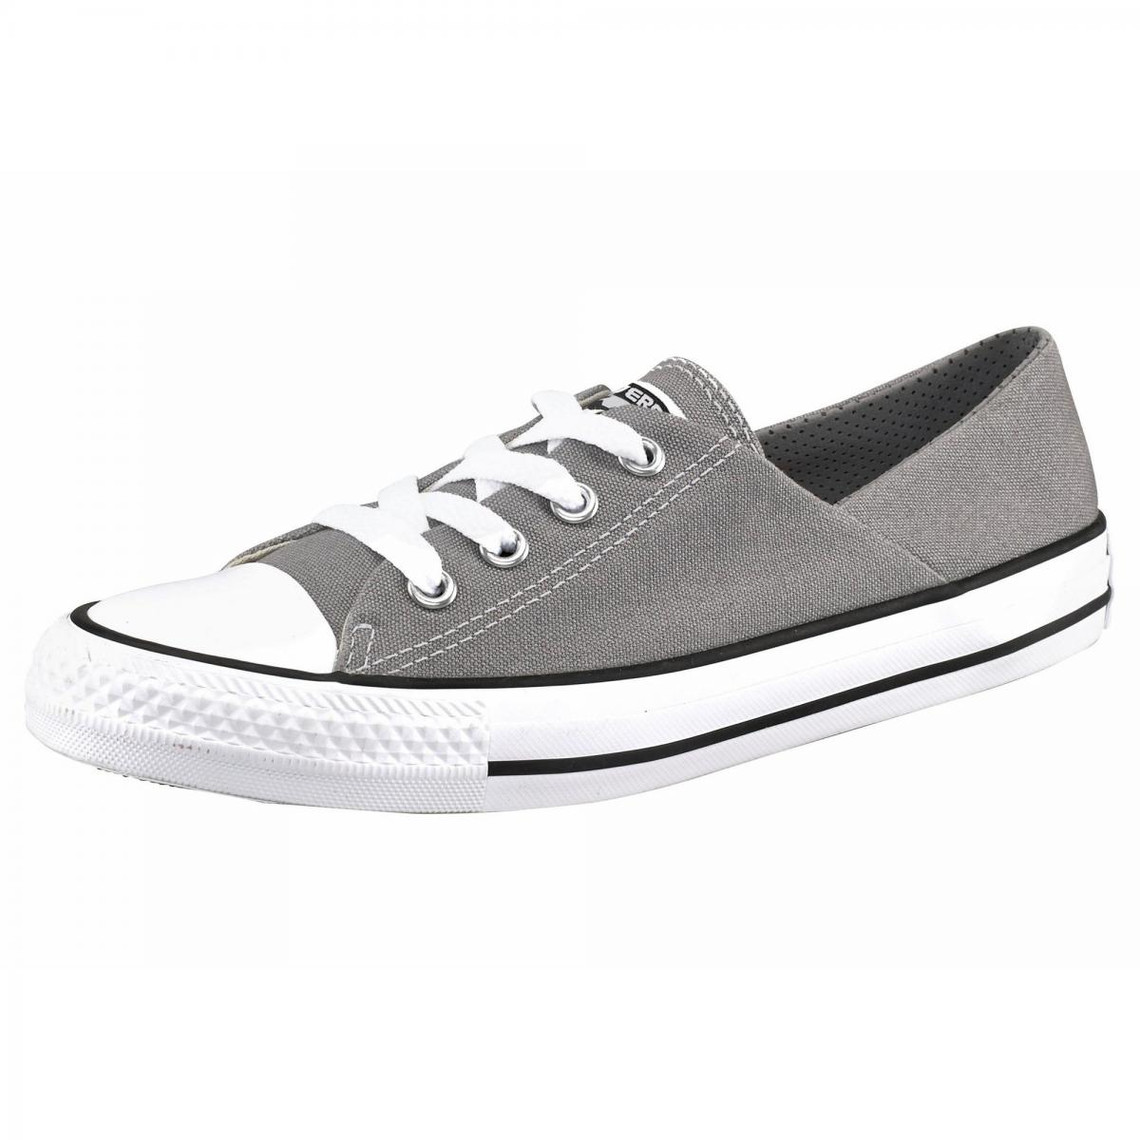 converse chuck taylor all star basse grise